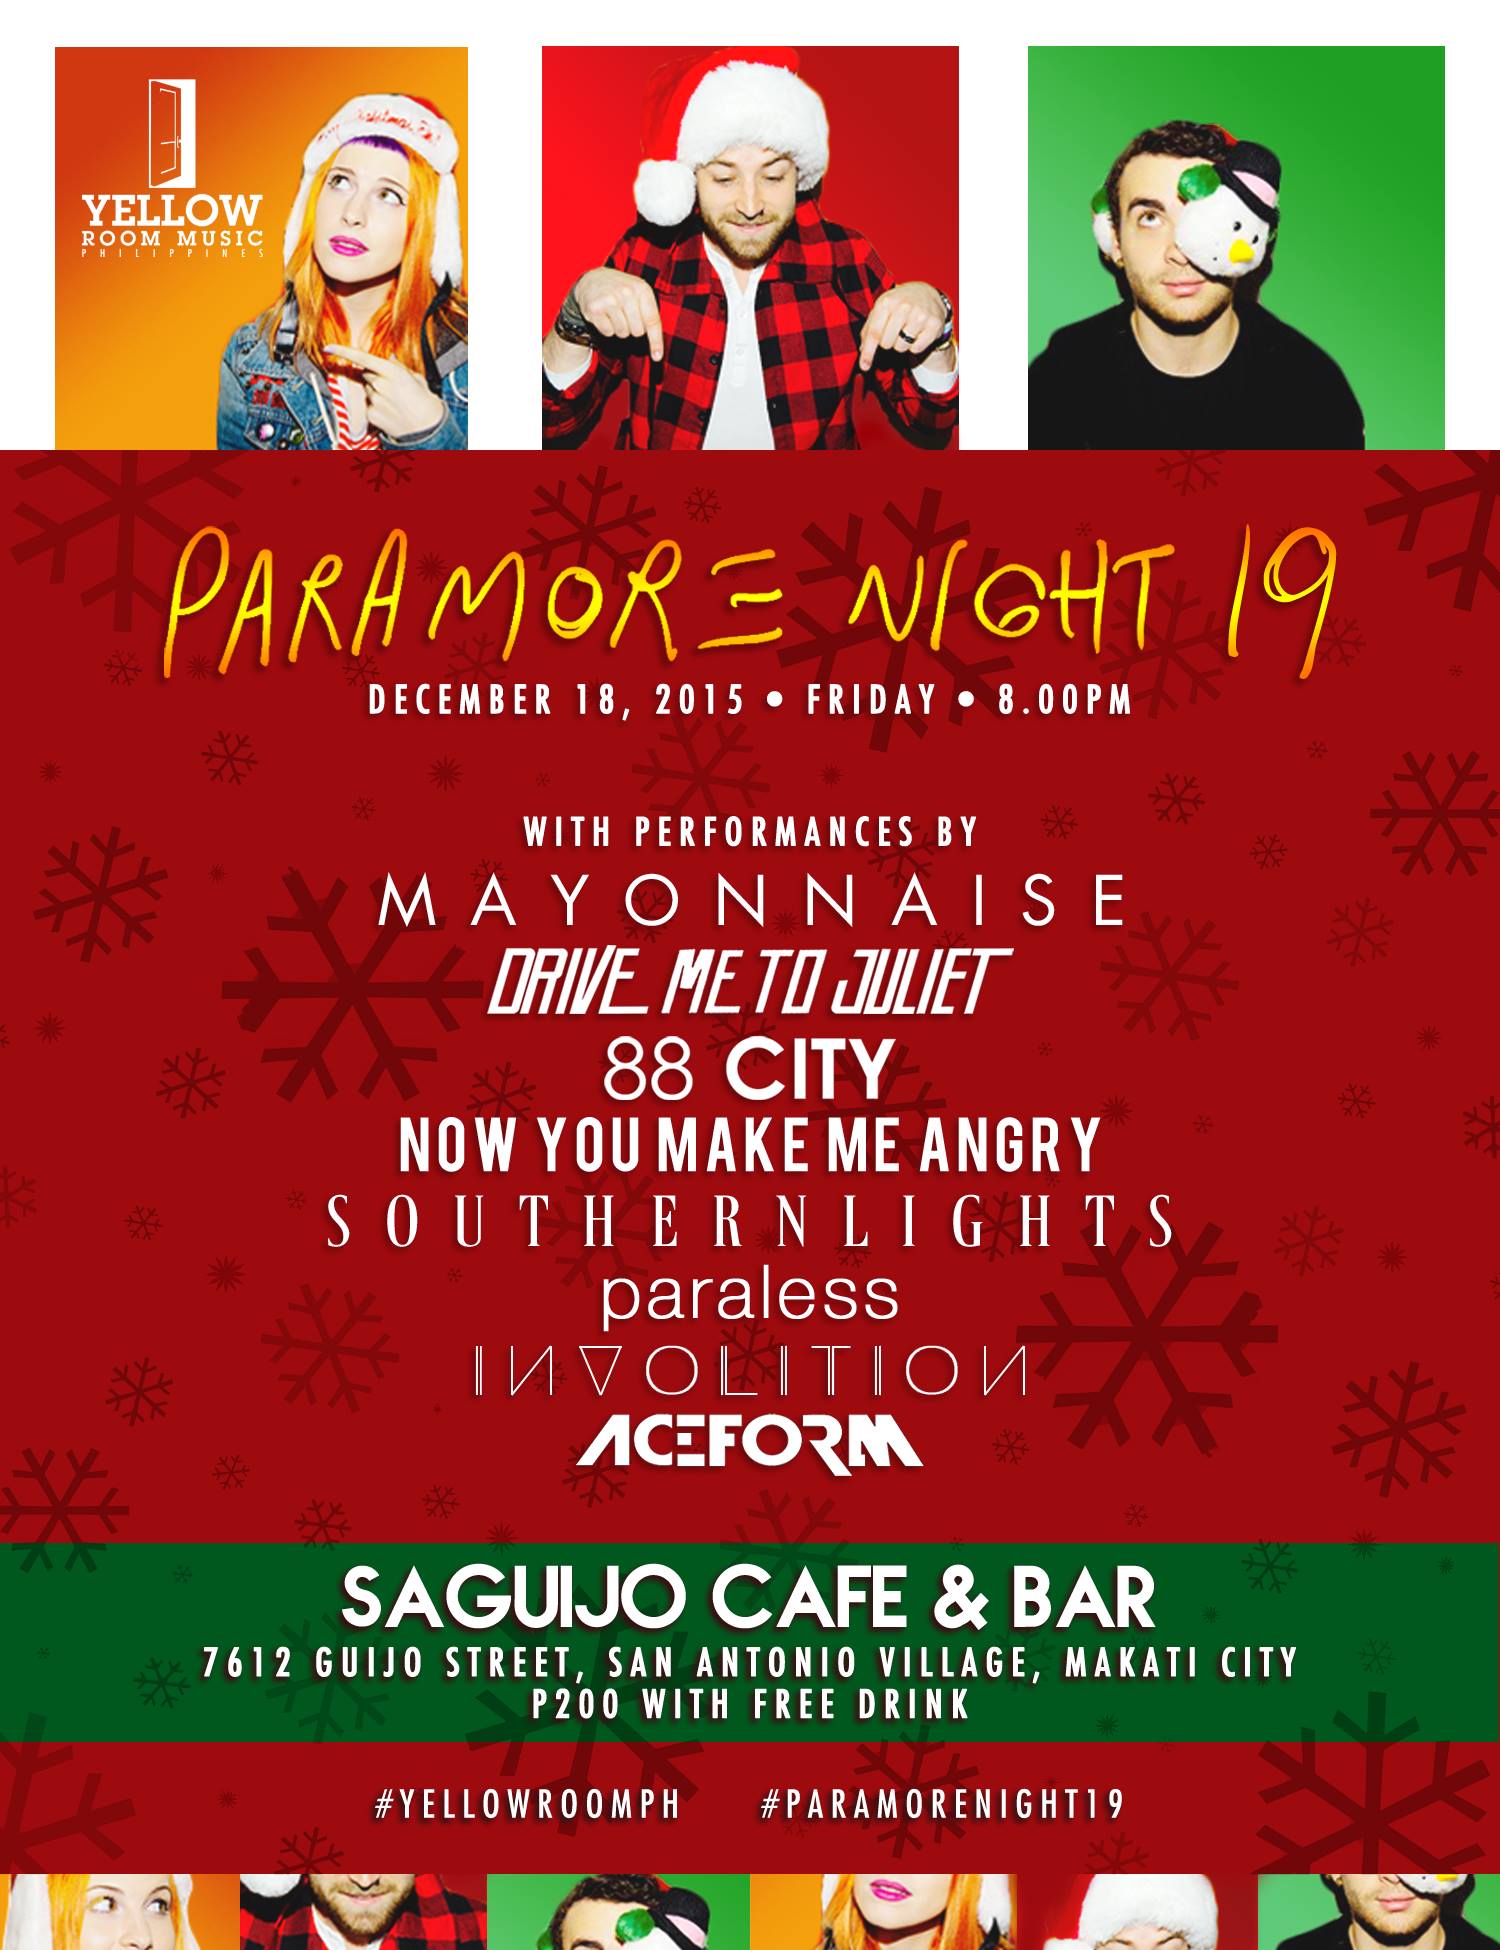 Paramore Night 19 clock Friday, December 18 at 8 PM - 2 AM Dec 18 at 8 PM to Dec 19 at 2 AM pin Show Map saGuijo Cafe + Bar Events 7612 Guijo Street, San Antonio Village, 1203 Makati, Philippines Paramore Night 19 Presented by The Yellow Room and Mismo Productions Featuring: • Mayonnaise • Drive me to Juliet • 88 City • Now You Make Me Angry • Southern Lights • Paraless • Involition • Ace Form Date: • 18th of December 2015, Friday Tme: • 8.00pm to 2.00am Venue: • saGuijo Cafe + Bar Events, 7612 Guijo Street, San Antonio Village, Makati City Entrance Fee: • P200 per person plus 1 free drink Merch: • Original Paramore Shirts from paramore.net available for P1,000 each #YellowRoomPH #ParamoreNight19